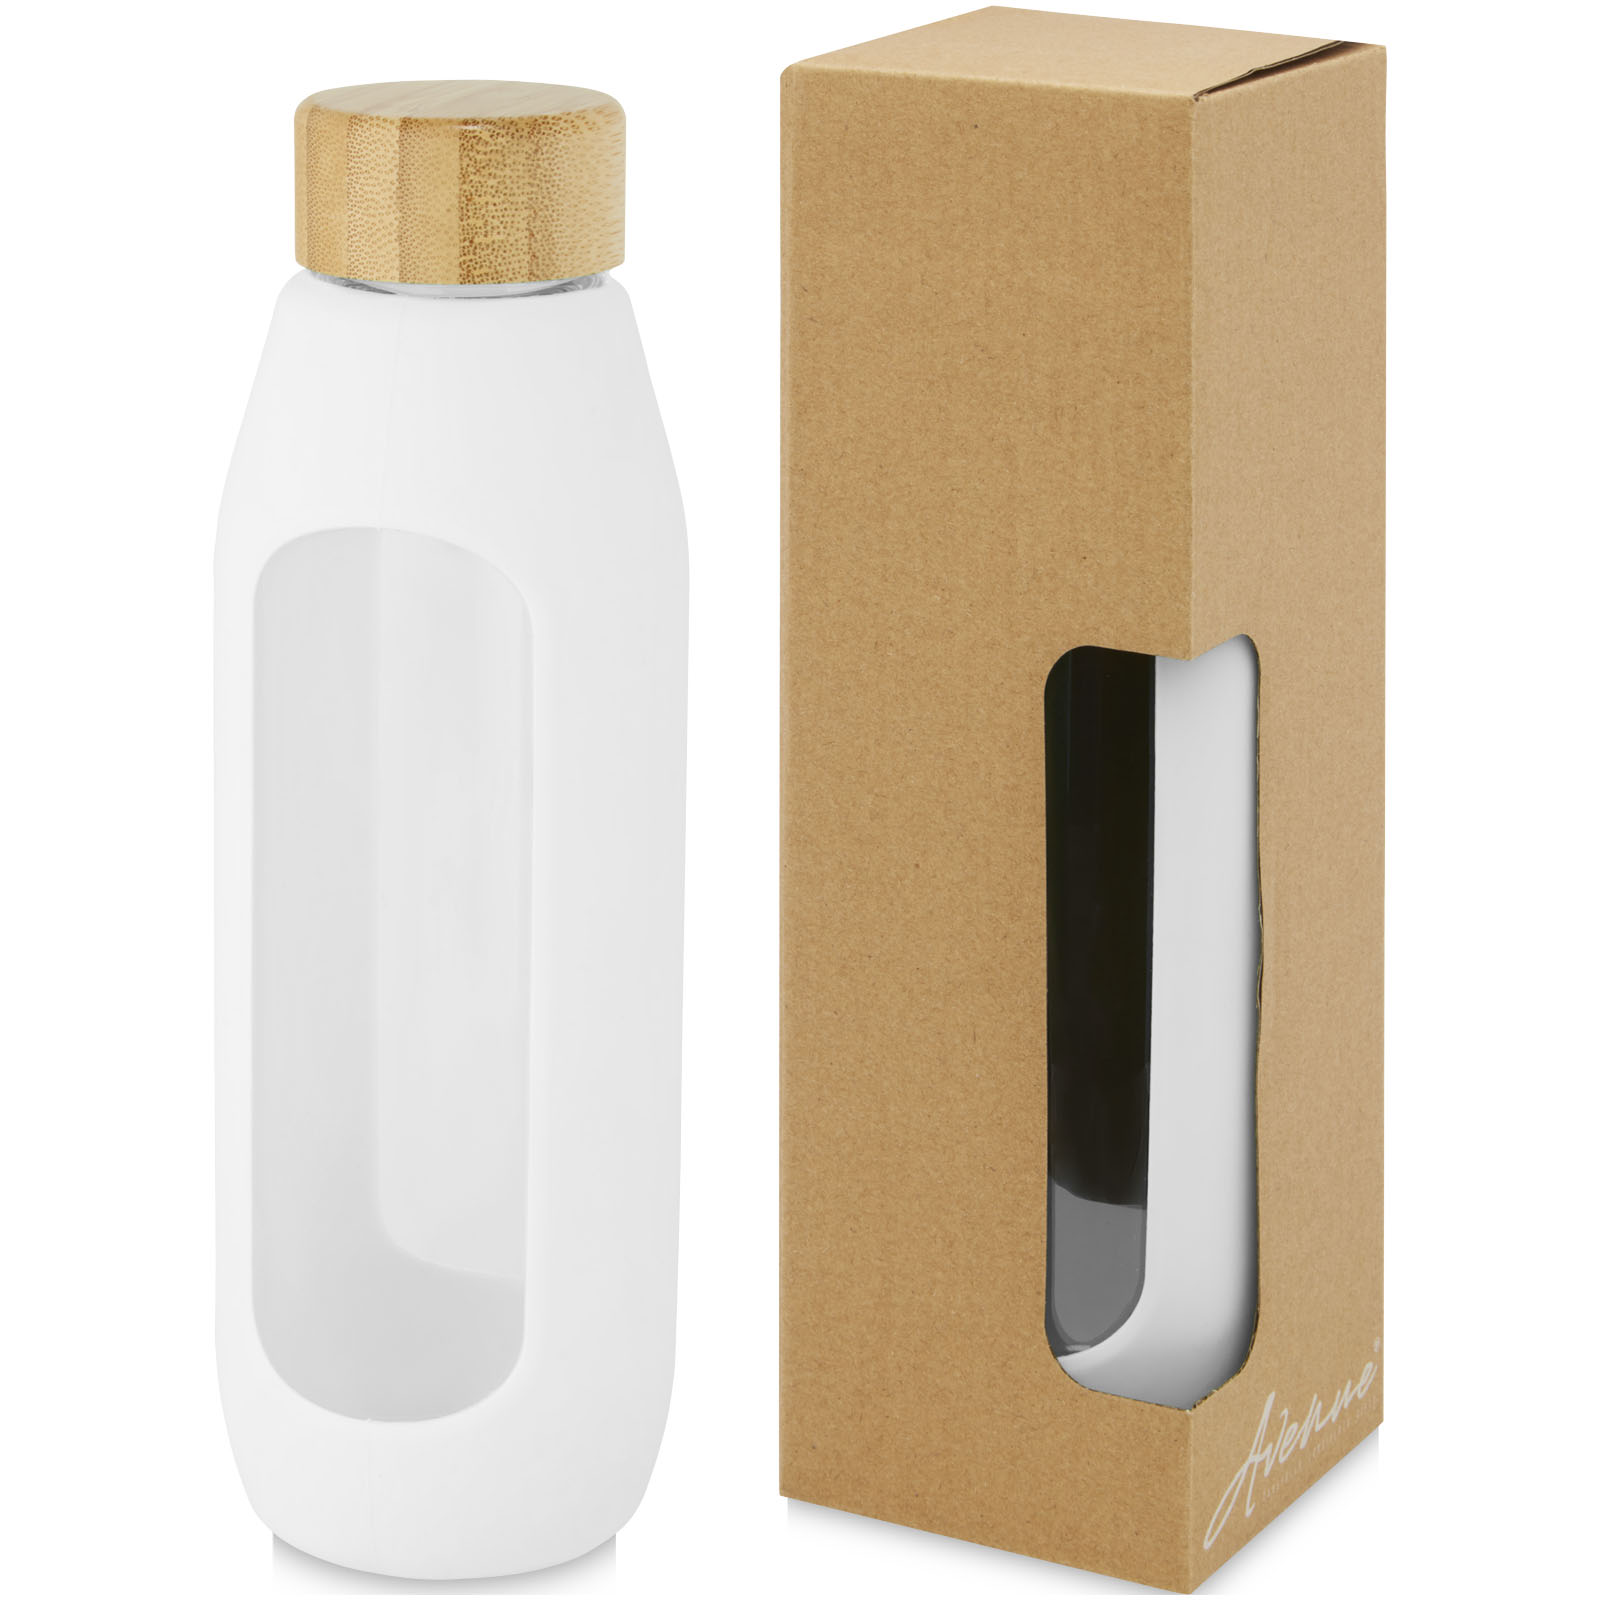 Water bottles - Tidan 600 ml borosilicate glass bottle with silicone grip